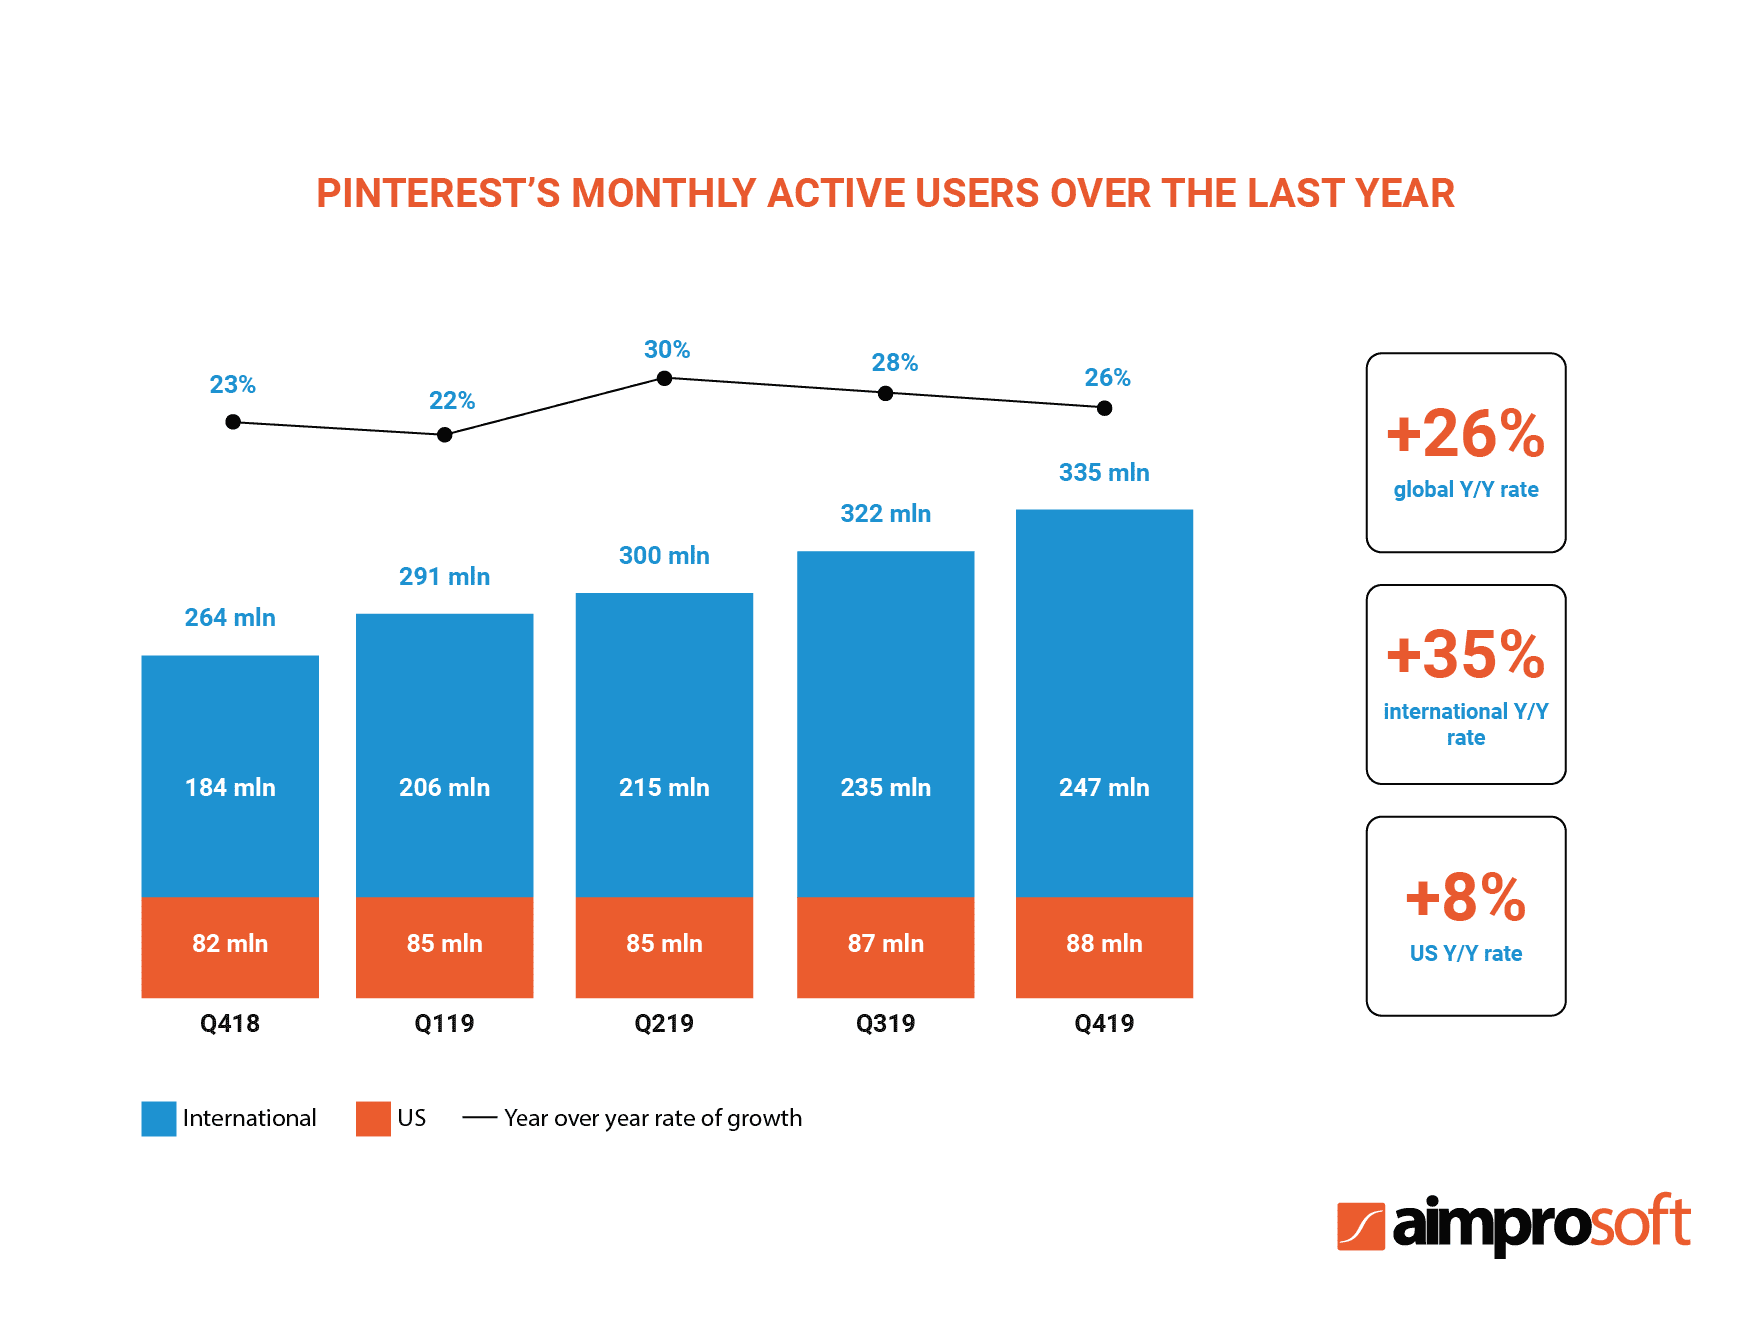 PInterest’s monthly active users